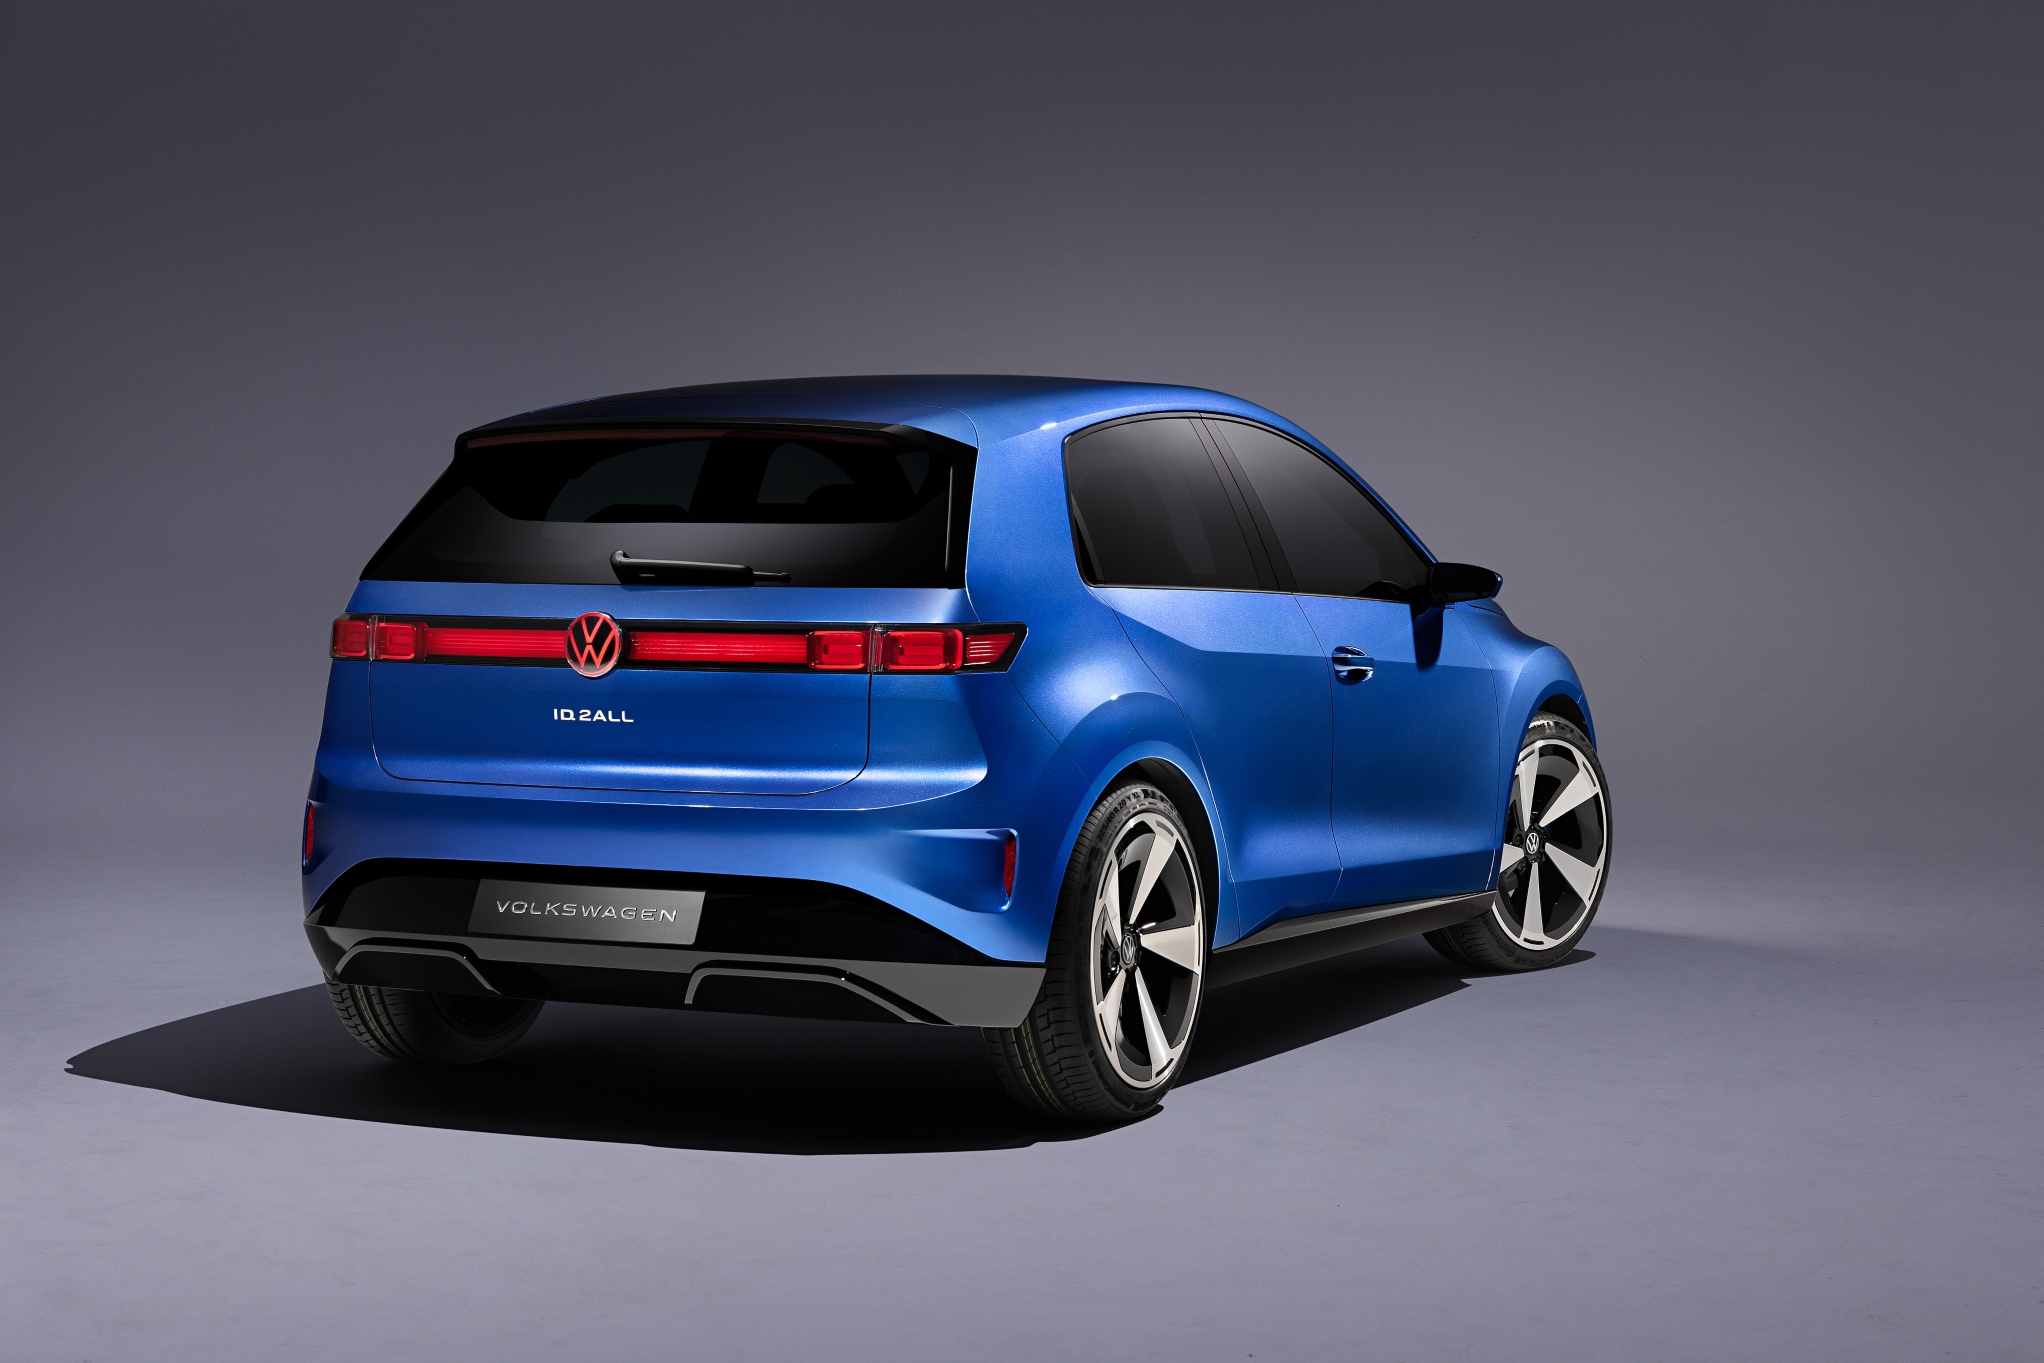 World premiere of the Volkswagen ID. 2all concept